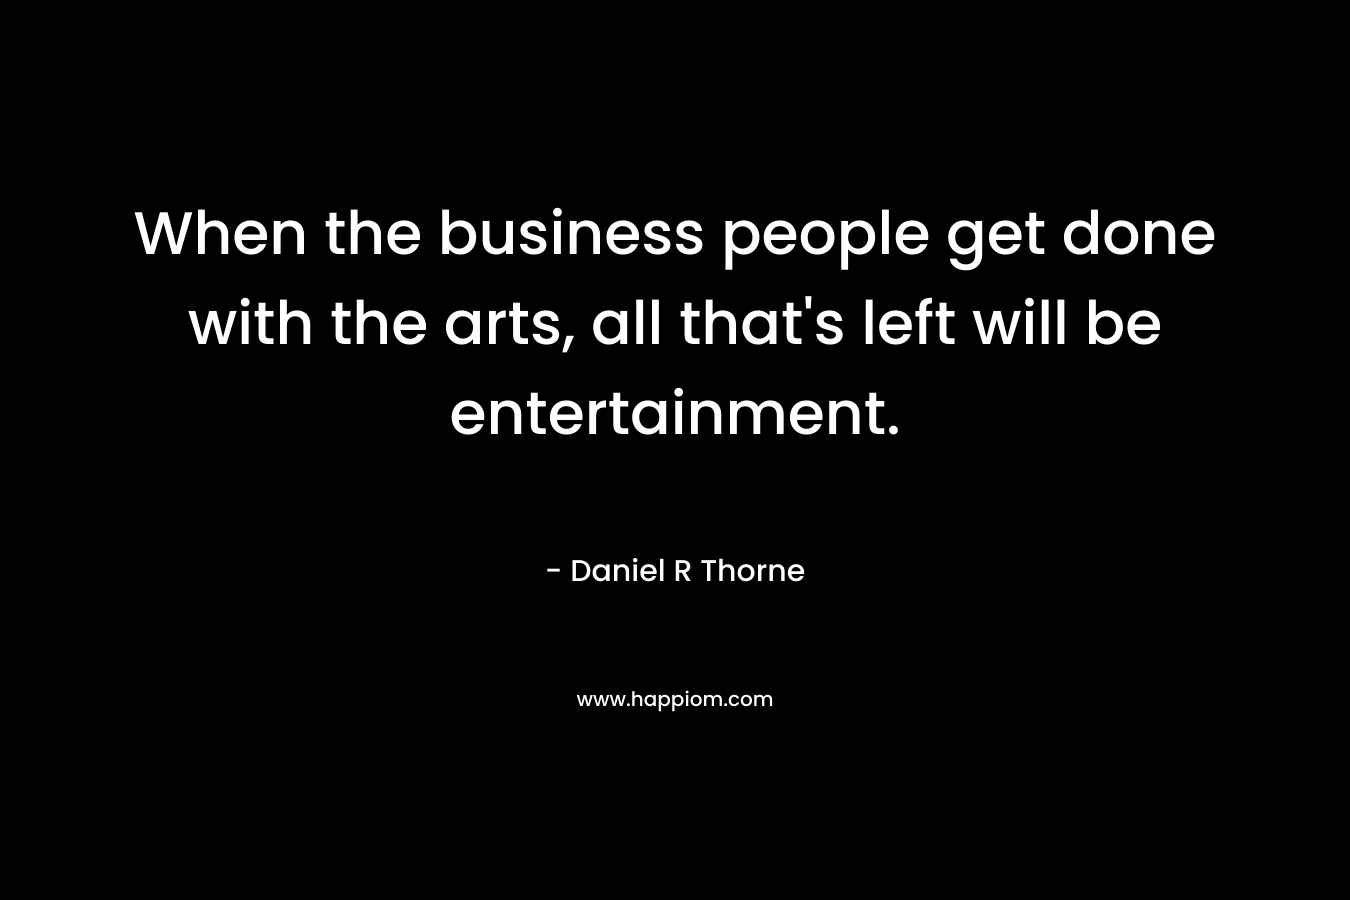 When the business people get done with the arts, all that's left will be entertainment.